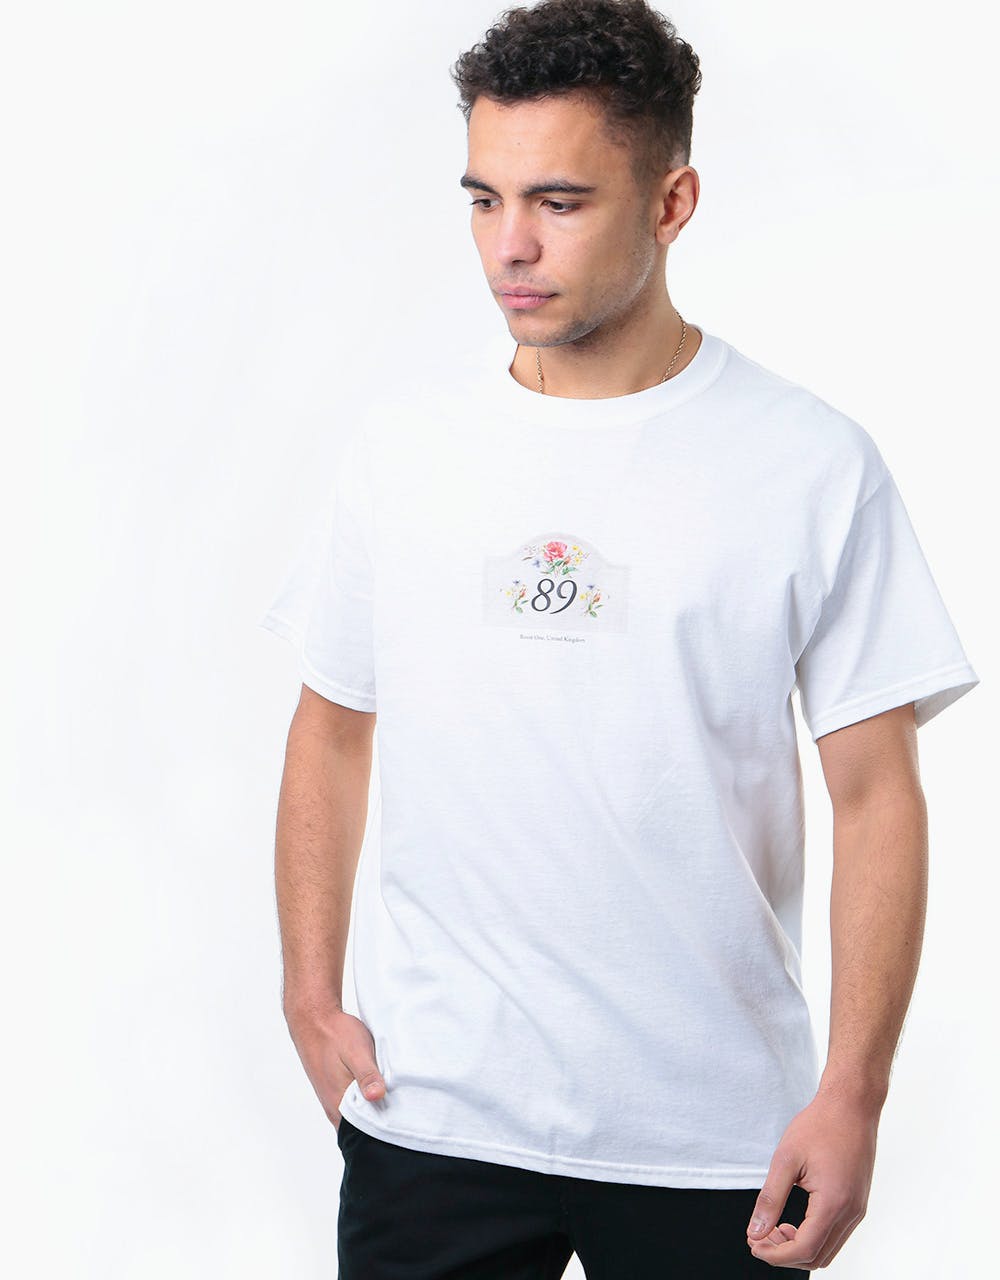 Route One Suburbs T-Shirt - White